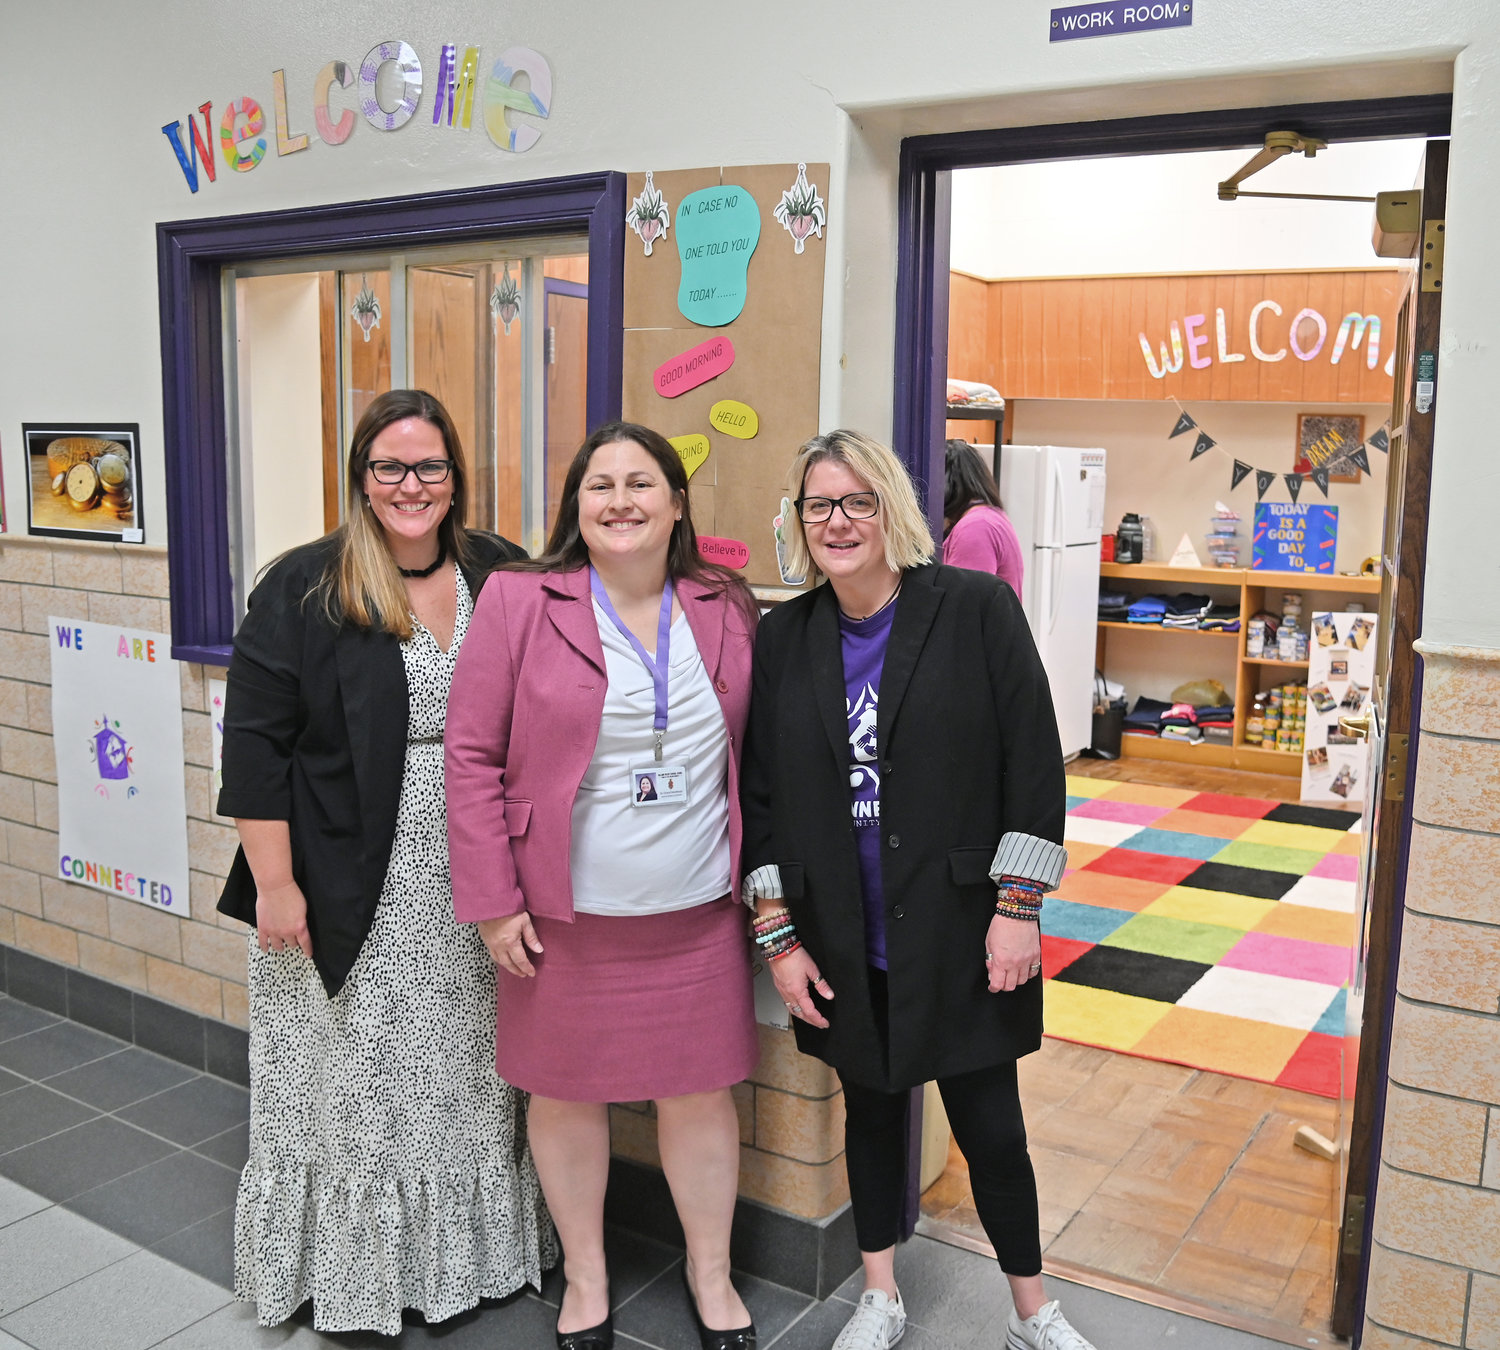 Officials unveil the new Connected Community Schools room at the Holland Patent Middle School, following a ceremonial ribbon-cutting on Wednesday. From left: Danielle Martin, co-leader of the Connected Community School program; Holland Patent Superintendent Dr. Cheryl Venettozzi; and Melissa Roys, co-leader of the CCS program.